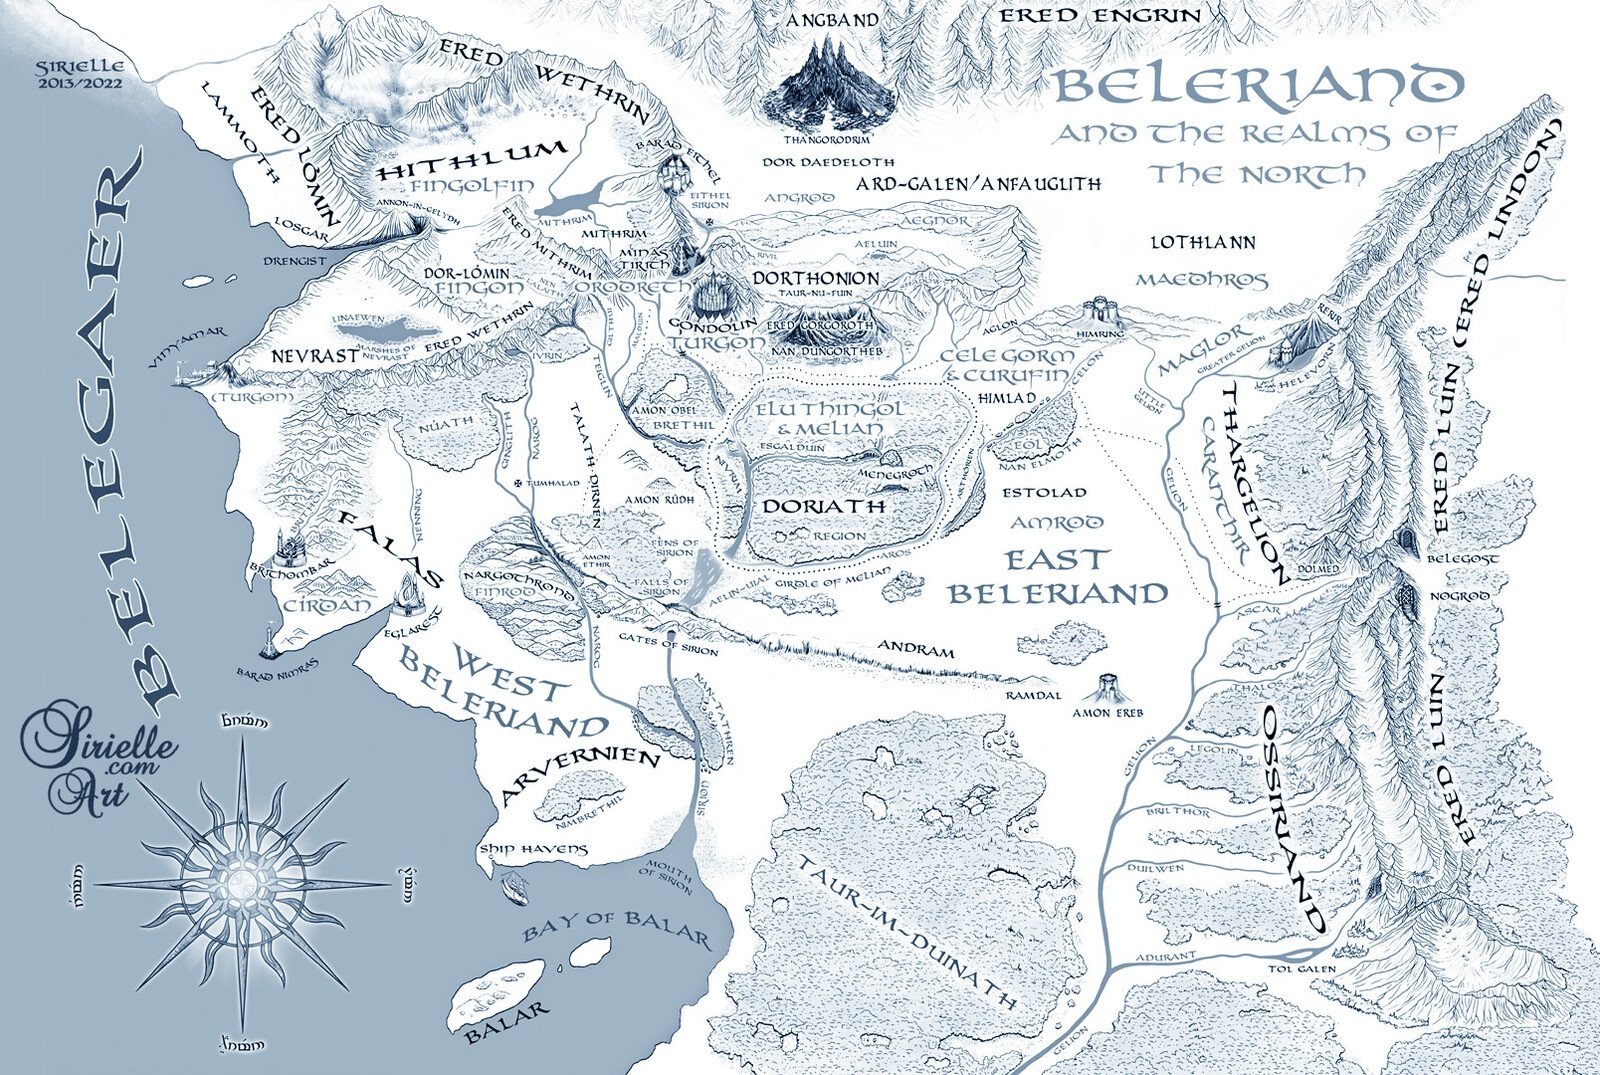 The Realms of the Noldor and the Sindar in Beleriand in the beginning of the I Age of Sun and during the Siege of Angband (uncropped map).